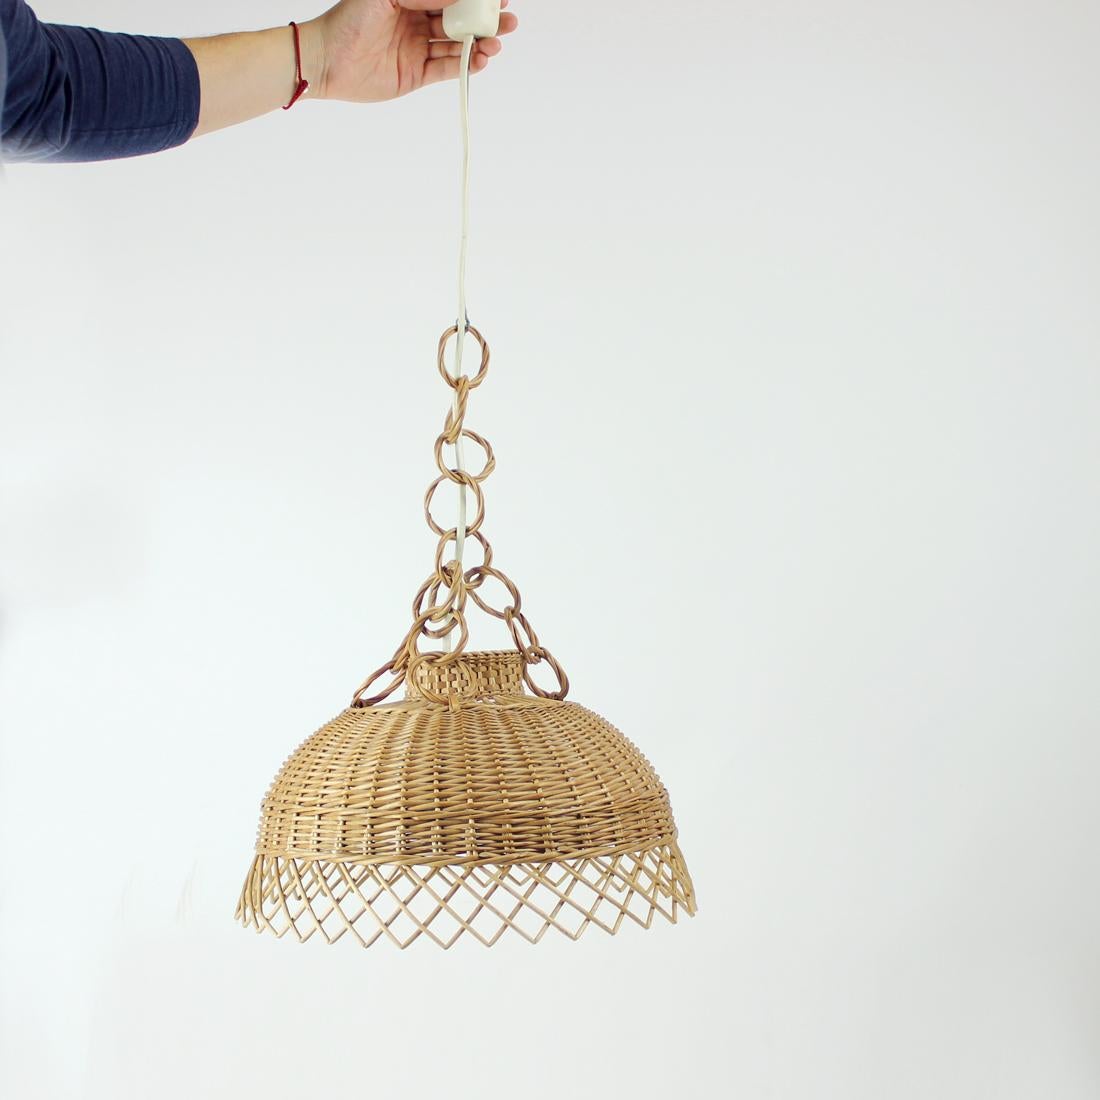 Beautiful vintage ceiling light produced in mid-century era of design. Produced in a fully rattan finish and shield. The rattan shows some aging but there are no damages or broken parts. Gives out beautiful light effect form the shield. The light